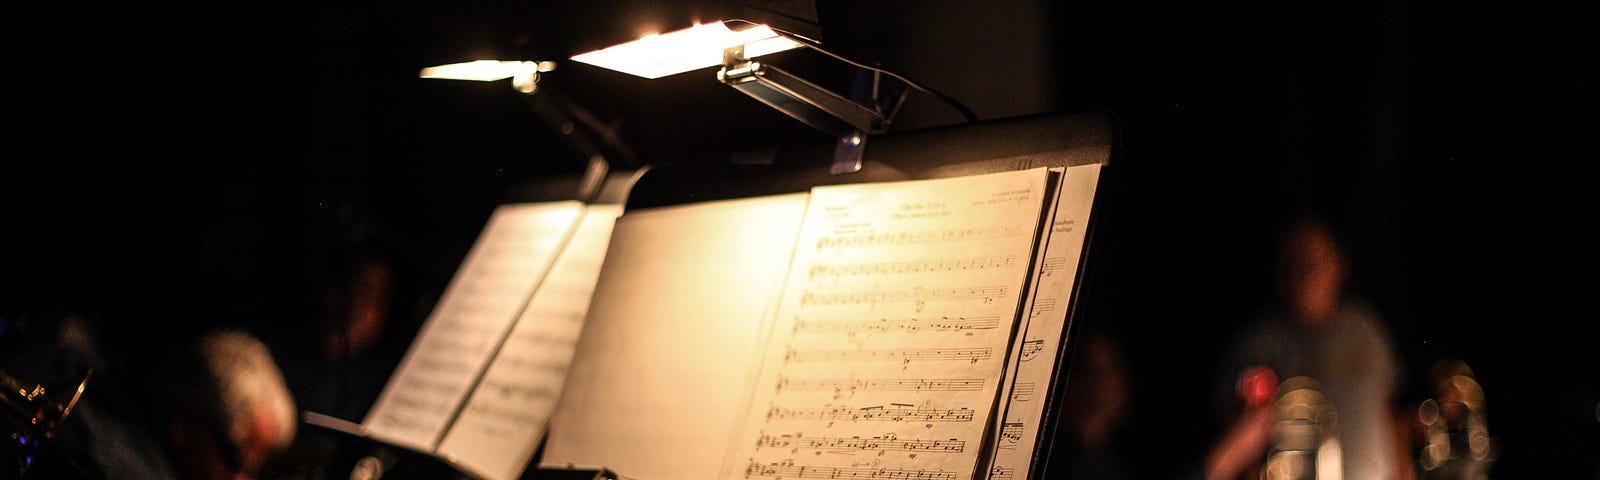 A music stand with classical music